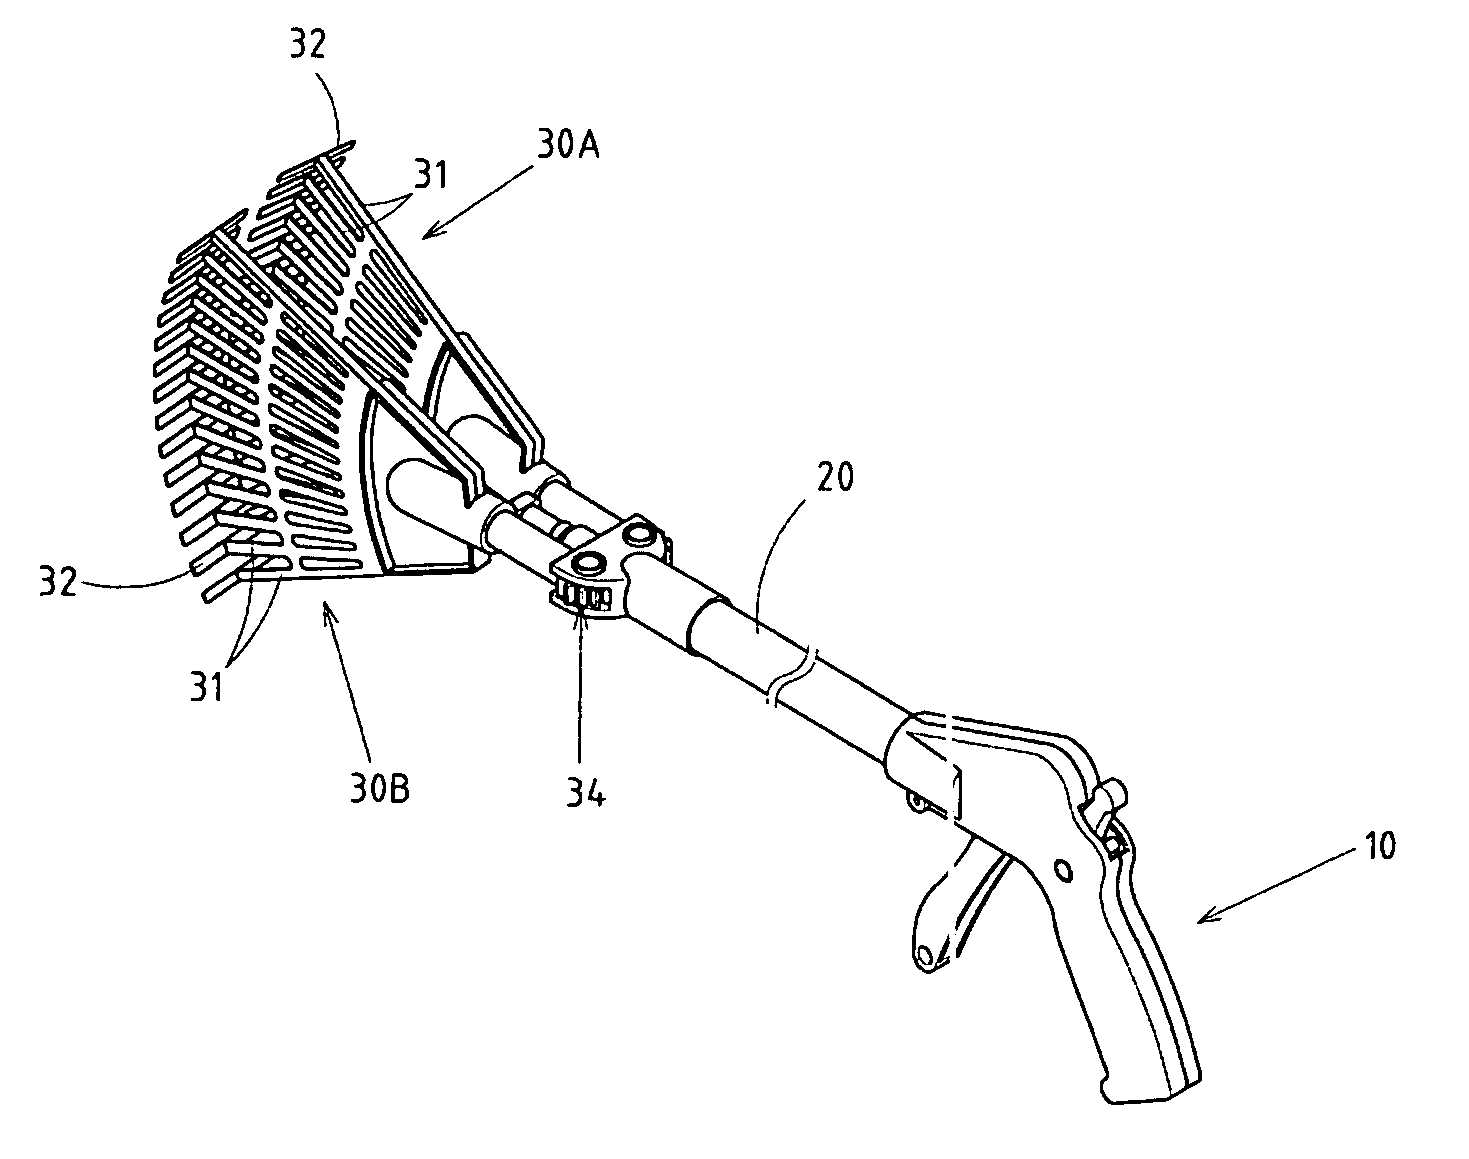 Gardening rake with improved structure